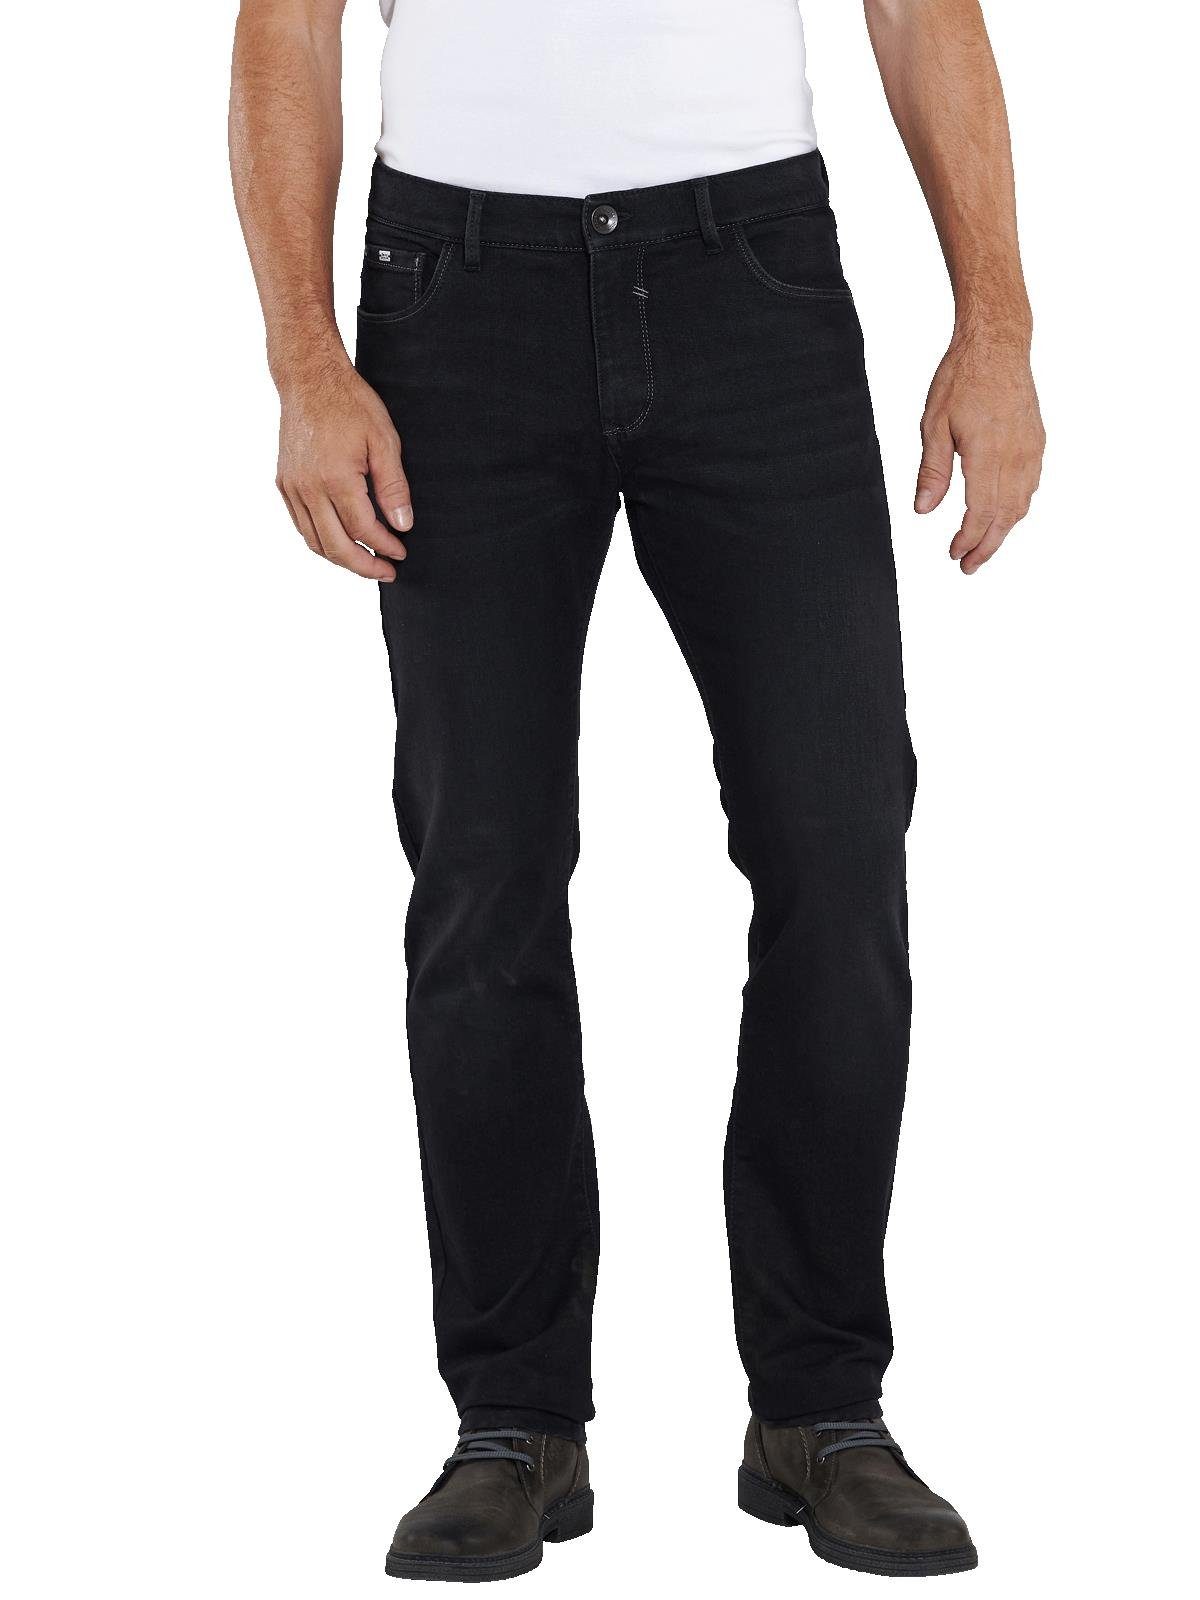 Engbers Stretch-Jeans Super-Stretch-Jeans Thermolite